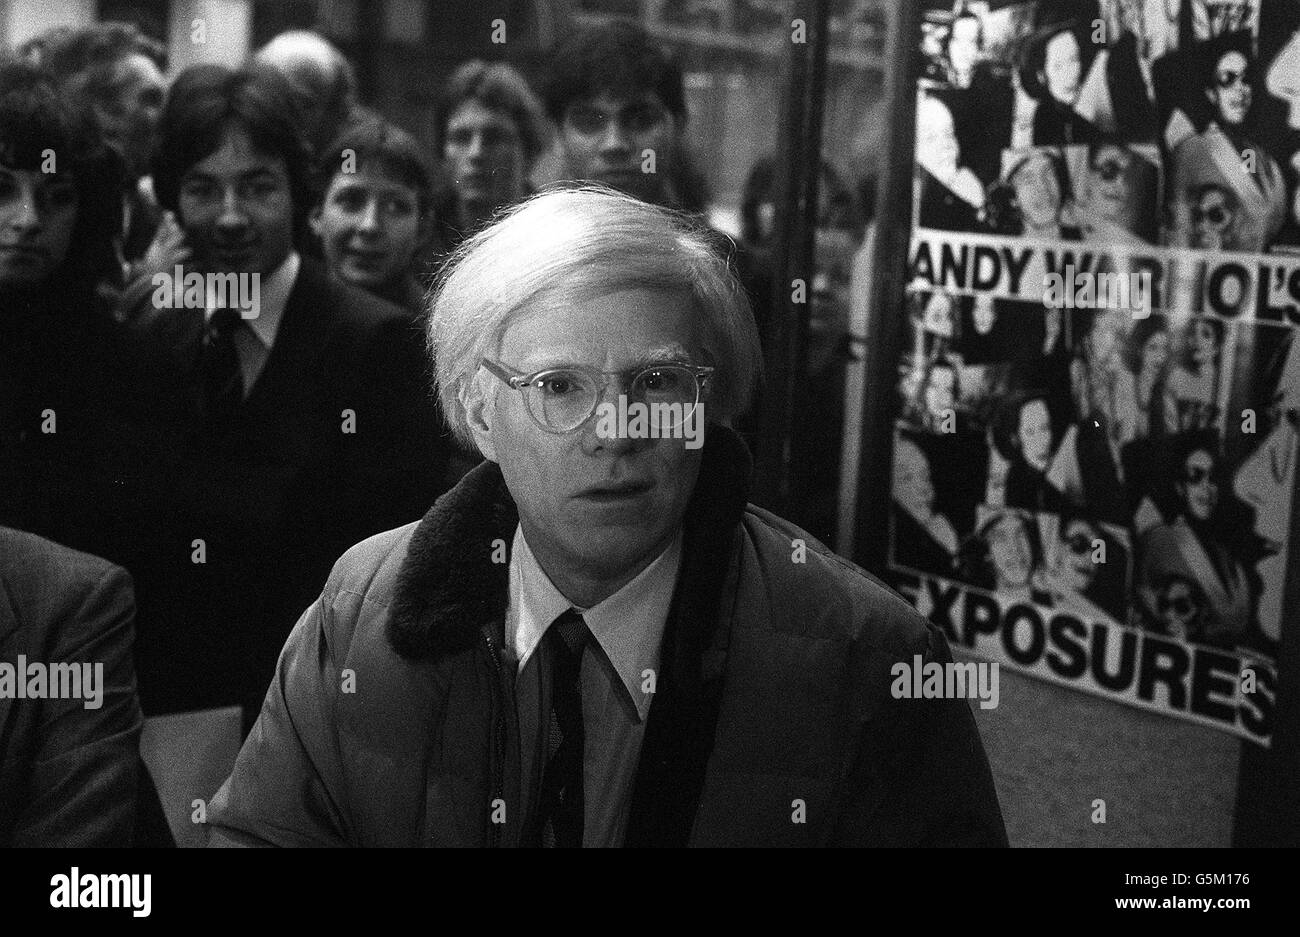 Controversial American artist Andy Warhol, best known for his giant Campbell's soup pictures, at the Arts Council Shop in London when he was signing copies of his new book 'Andy Warhol's Exposures.' Stock Photo